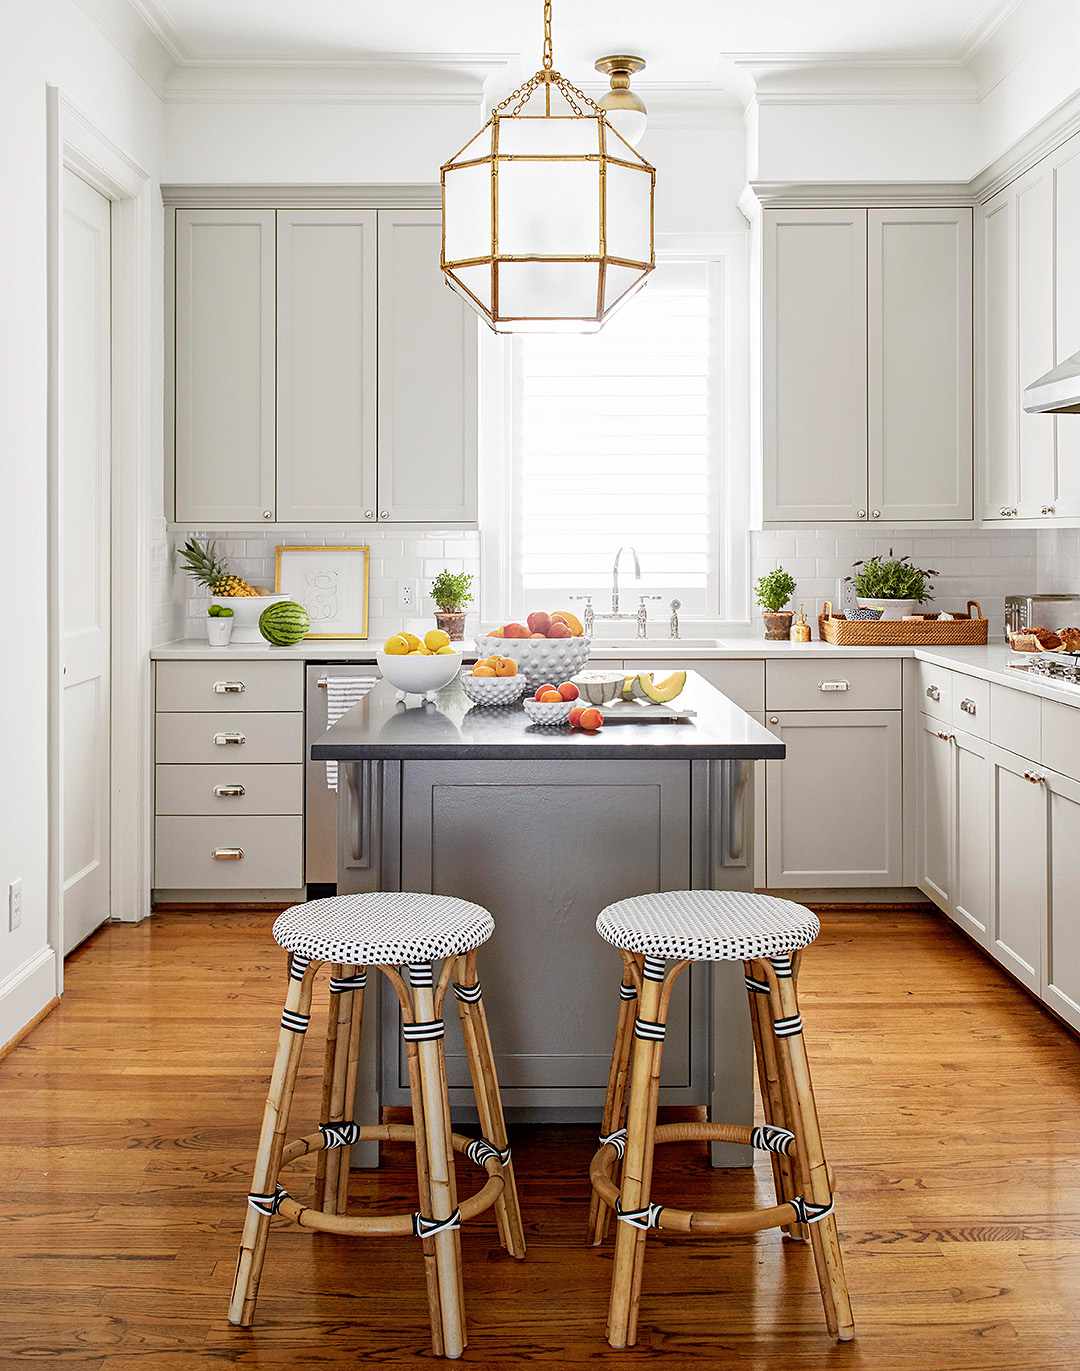 20 Small Kitchen Island Ideas That Maximize Storage and Prep Space ...